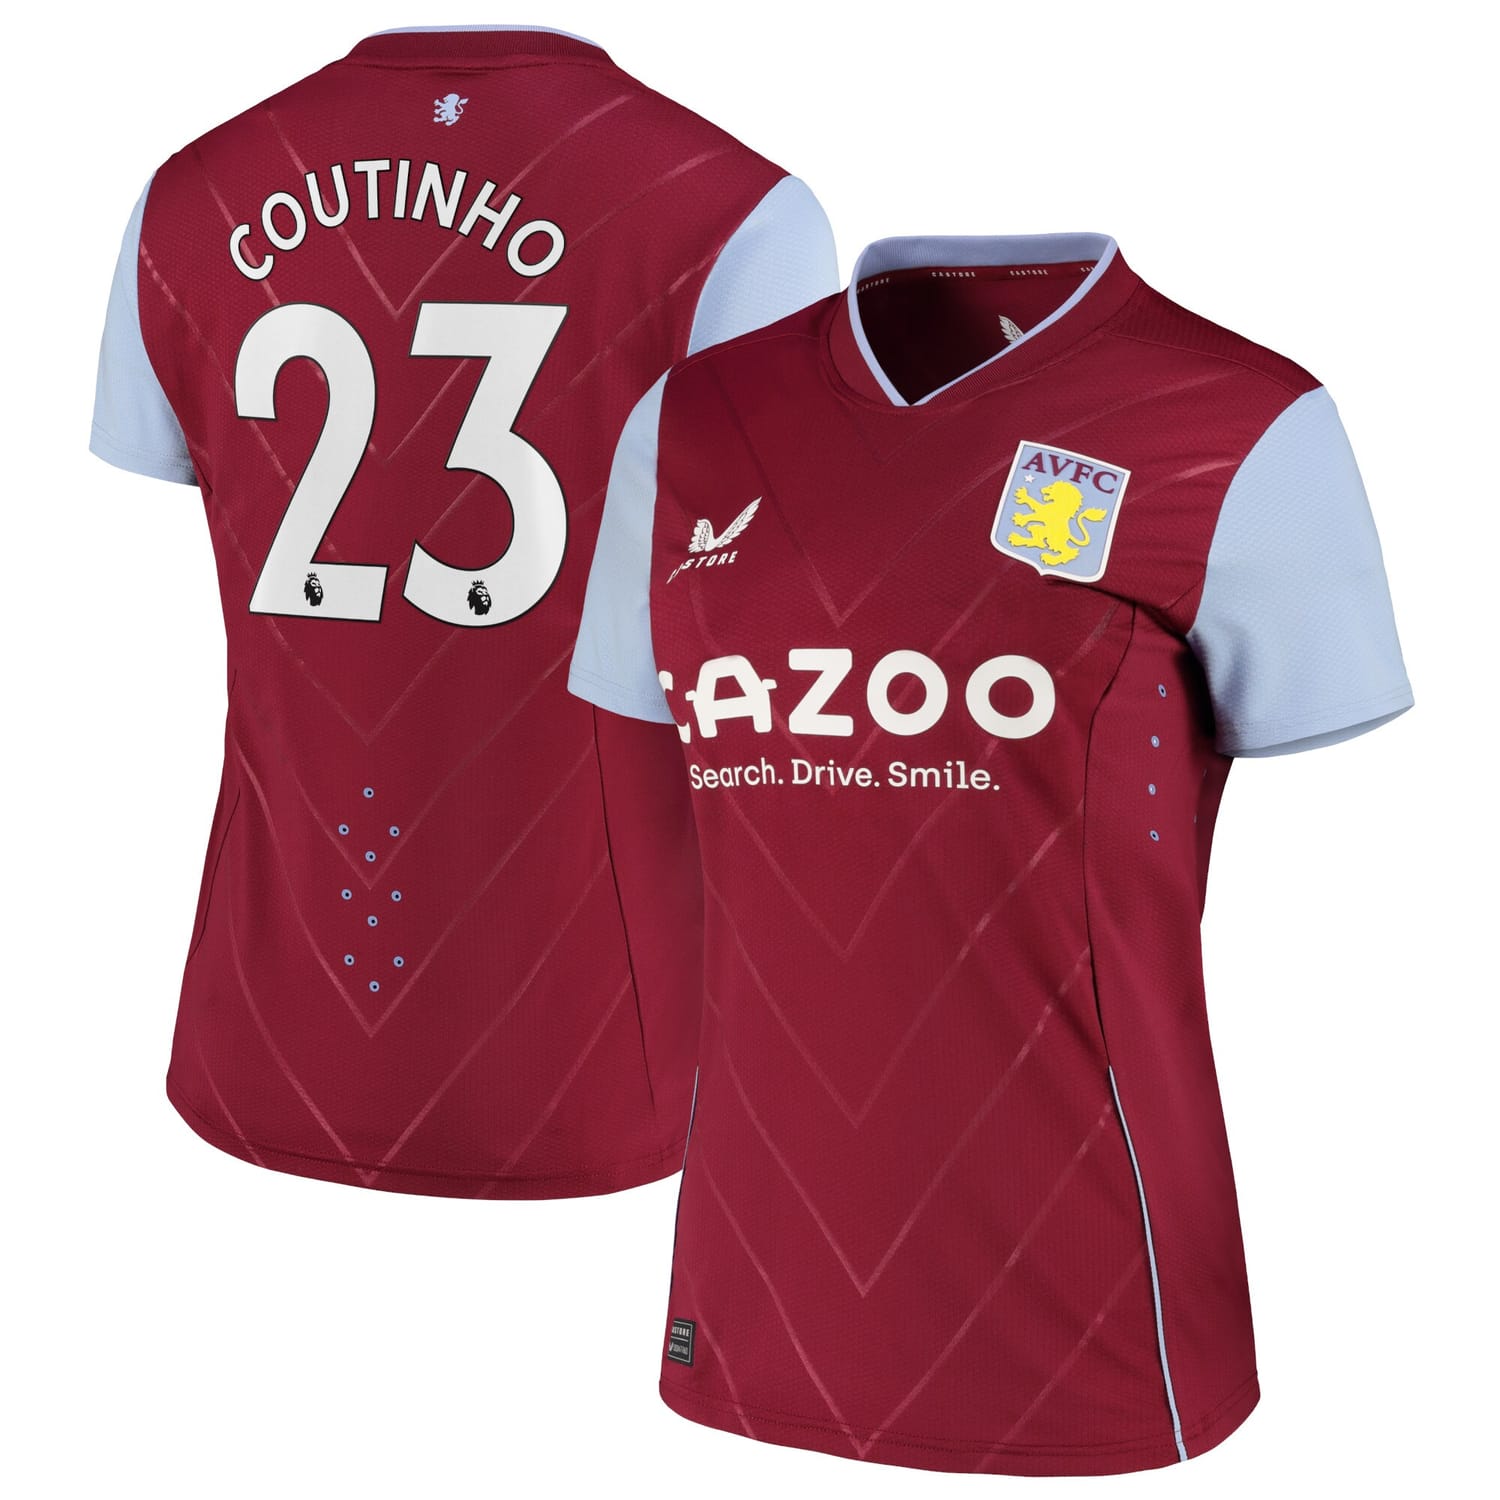 Premier League Ast. Villa Home Pro Jersey Shirt 2022-23 player Philippe Coutinho 23 printing for Women